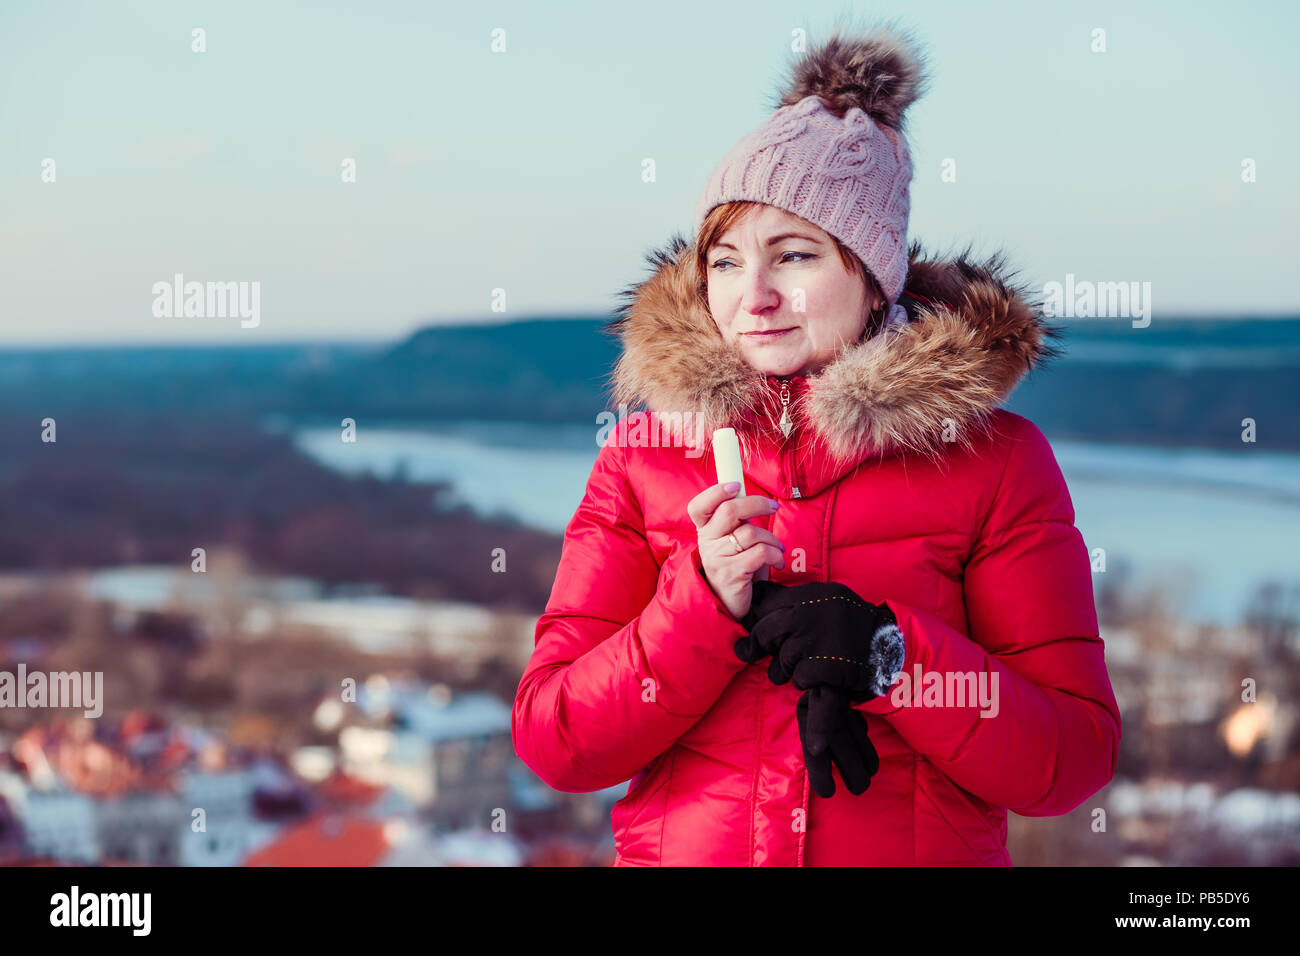 Woman applying lip balsam while walk in a wintery day. Wearing red coat and cap. Town in the background Stock Photo